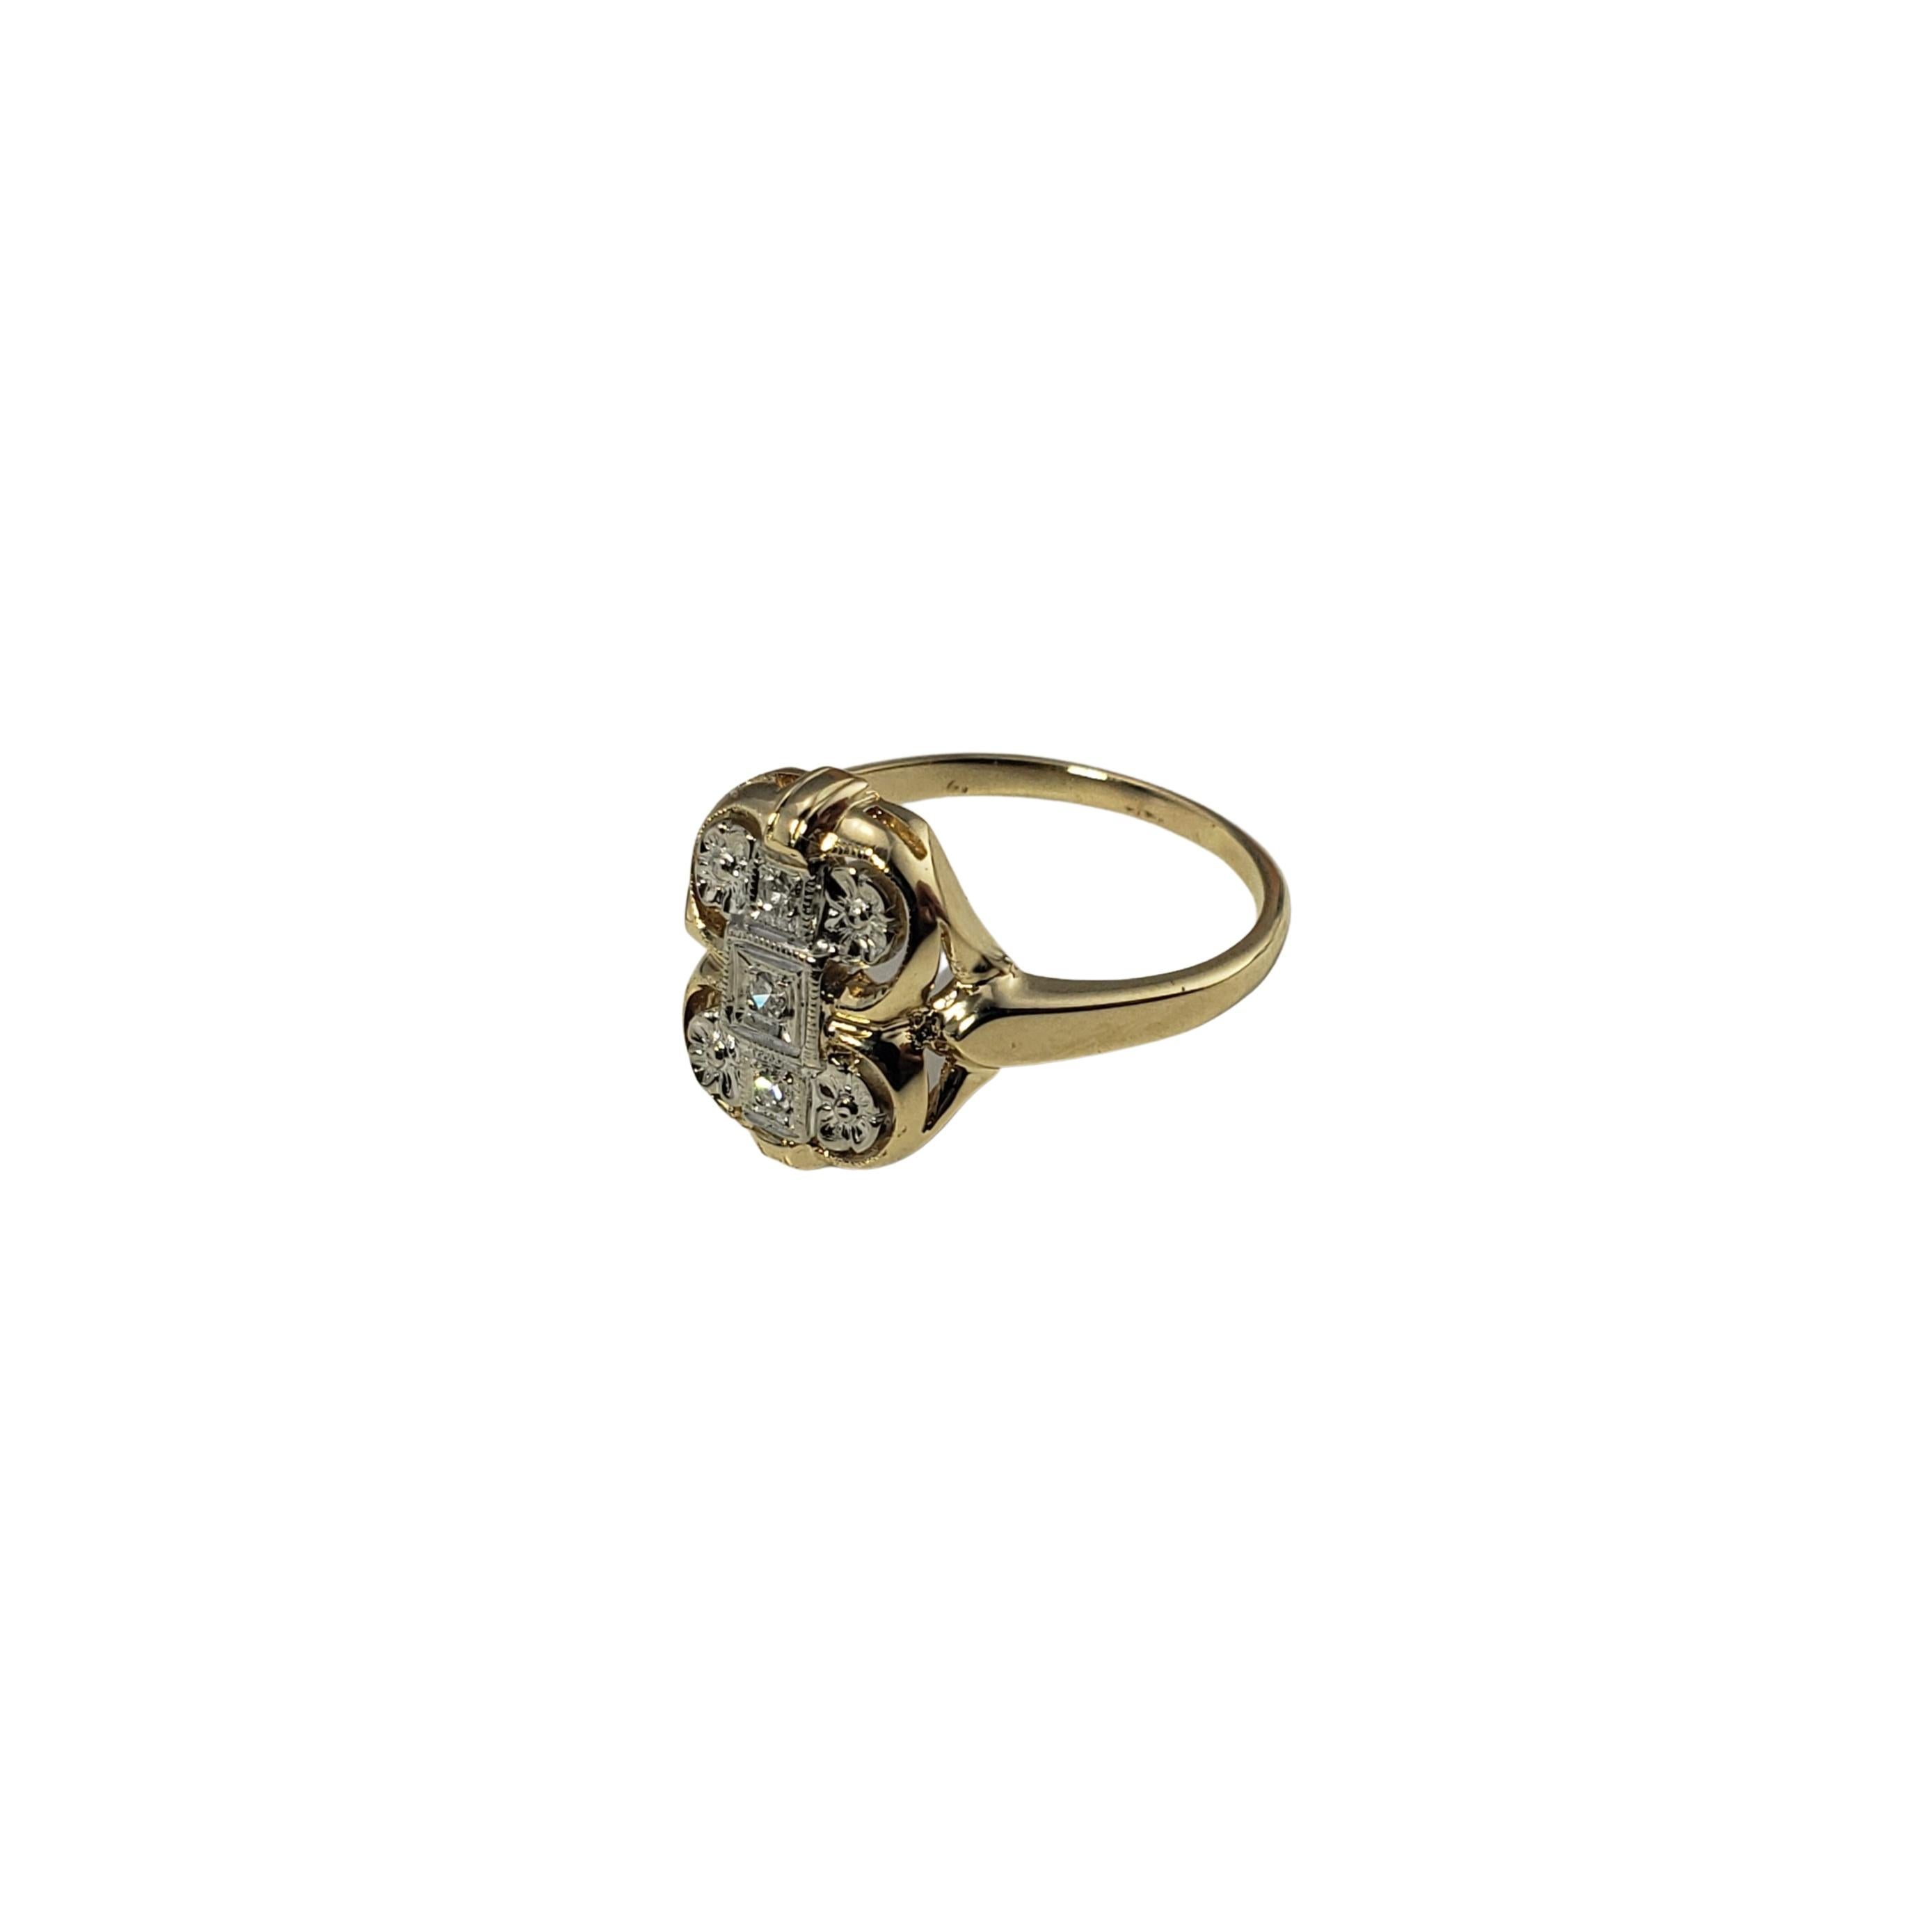 Vintage 14 Karat Yellow/White Gold and Diamond Ring Size 8.75-

This lovely ring features three round single cut diamonds set in beautifully detailed 14K yellow and white gold. Width: 15 mm.
Shank: 2 mm.

Approximate total diamond weight: .06